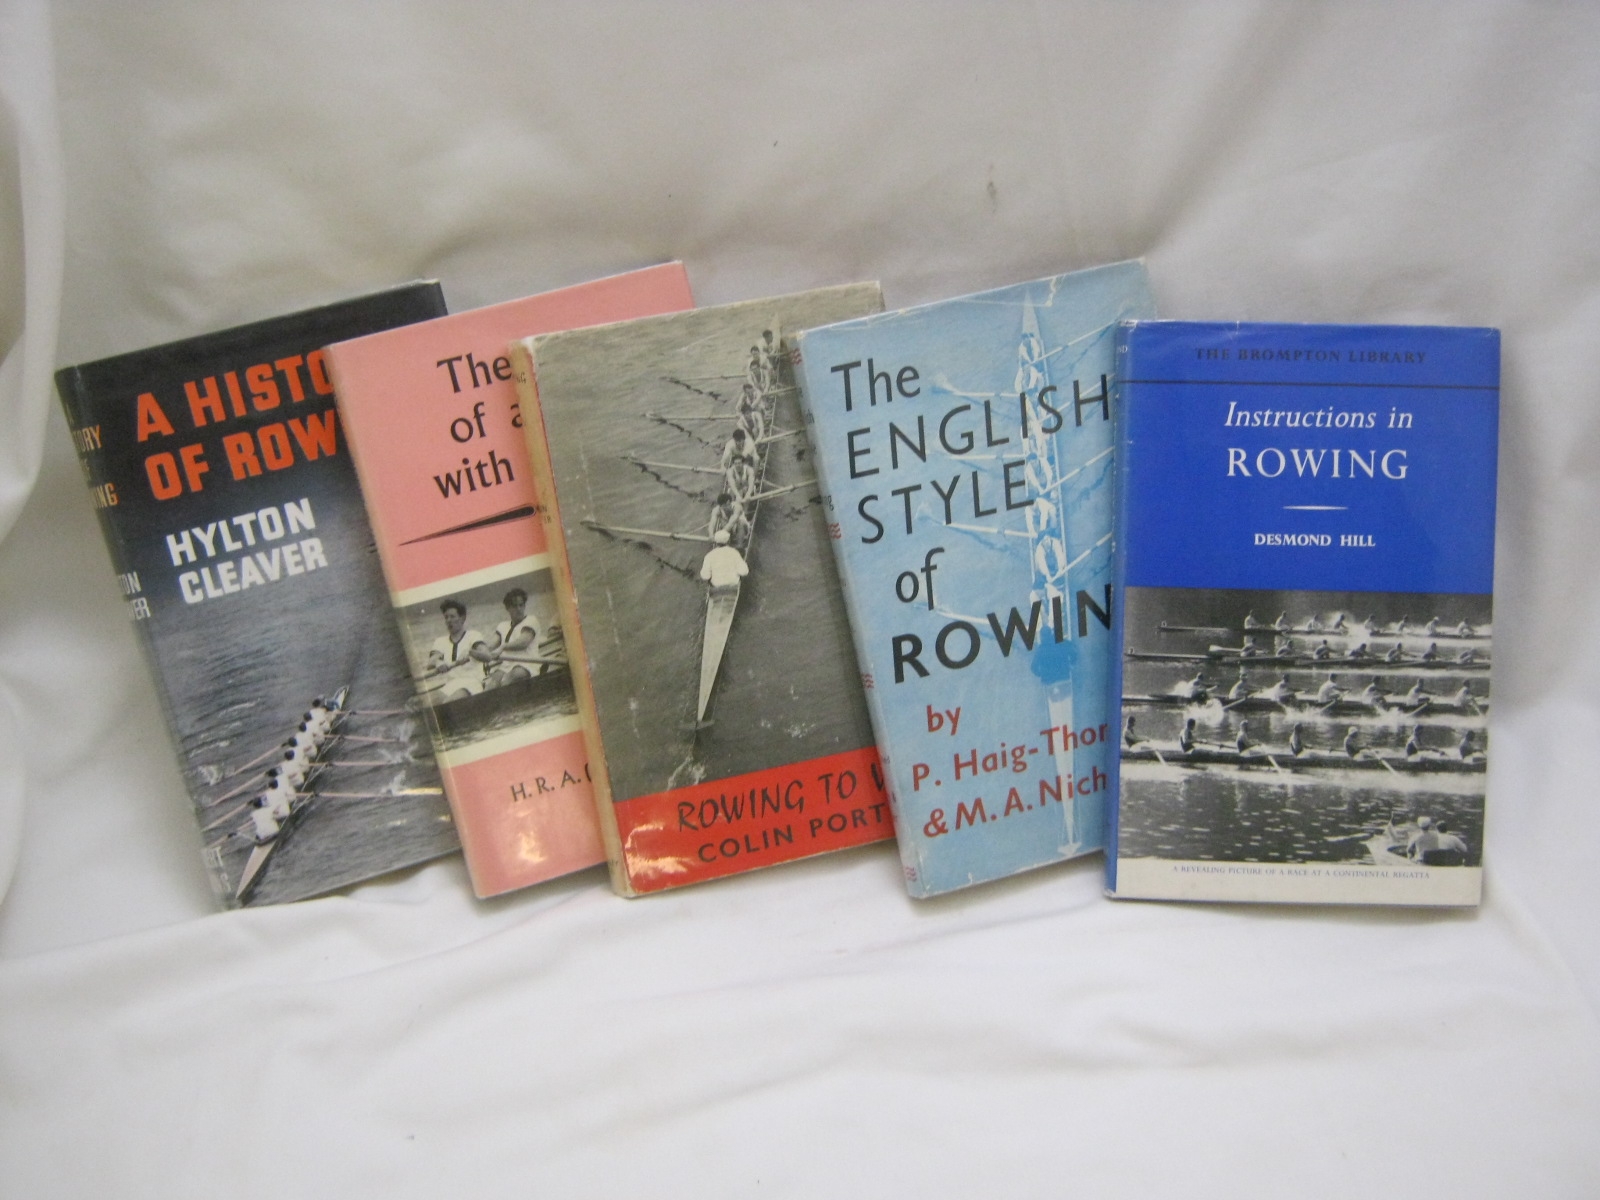 DESMOND HILL: INSTRUCTIONS IN ROWING, L, Museum Press Ltd, 1963, 1st edn, sigd by author and dtd